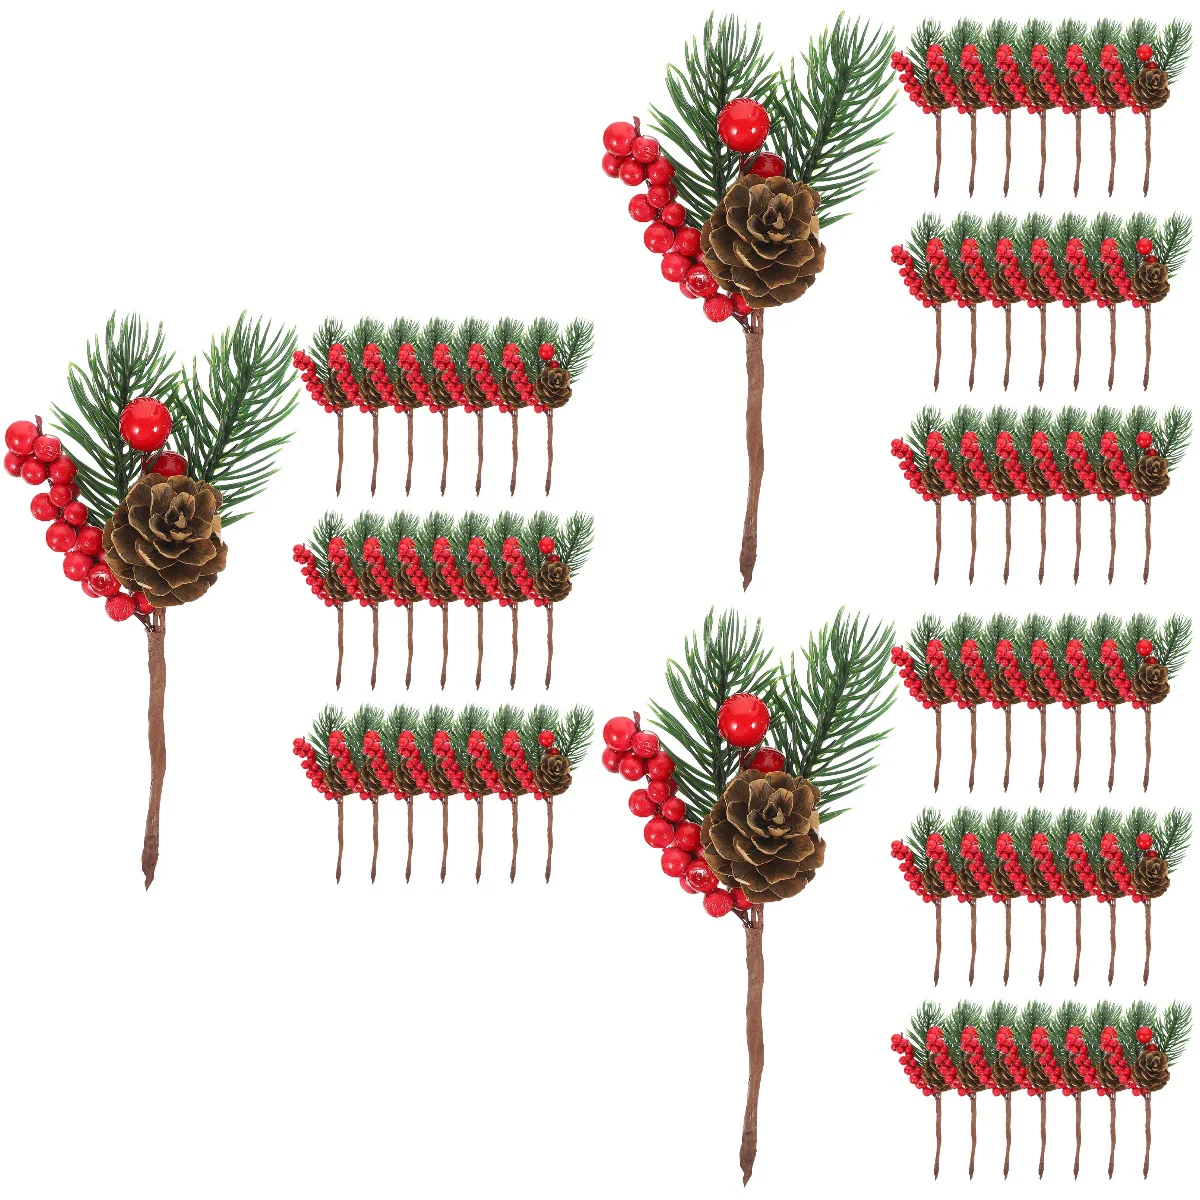 

30 Pcs Artificial Pine Cone Photo Props Holiday Picks Berry Xmas Branches Desktop Adornment Foam Christmas Gift